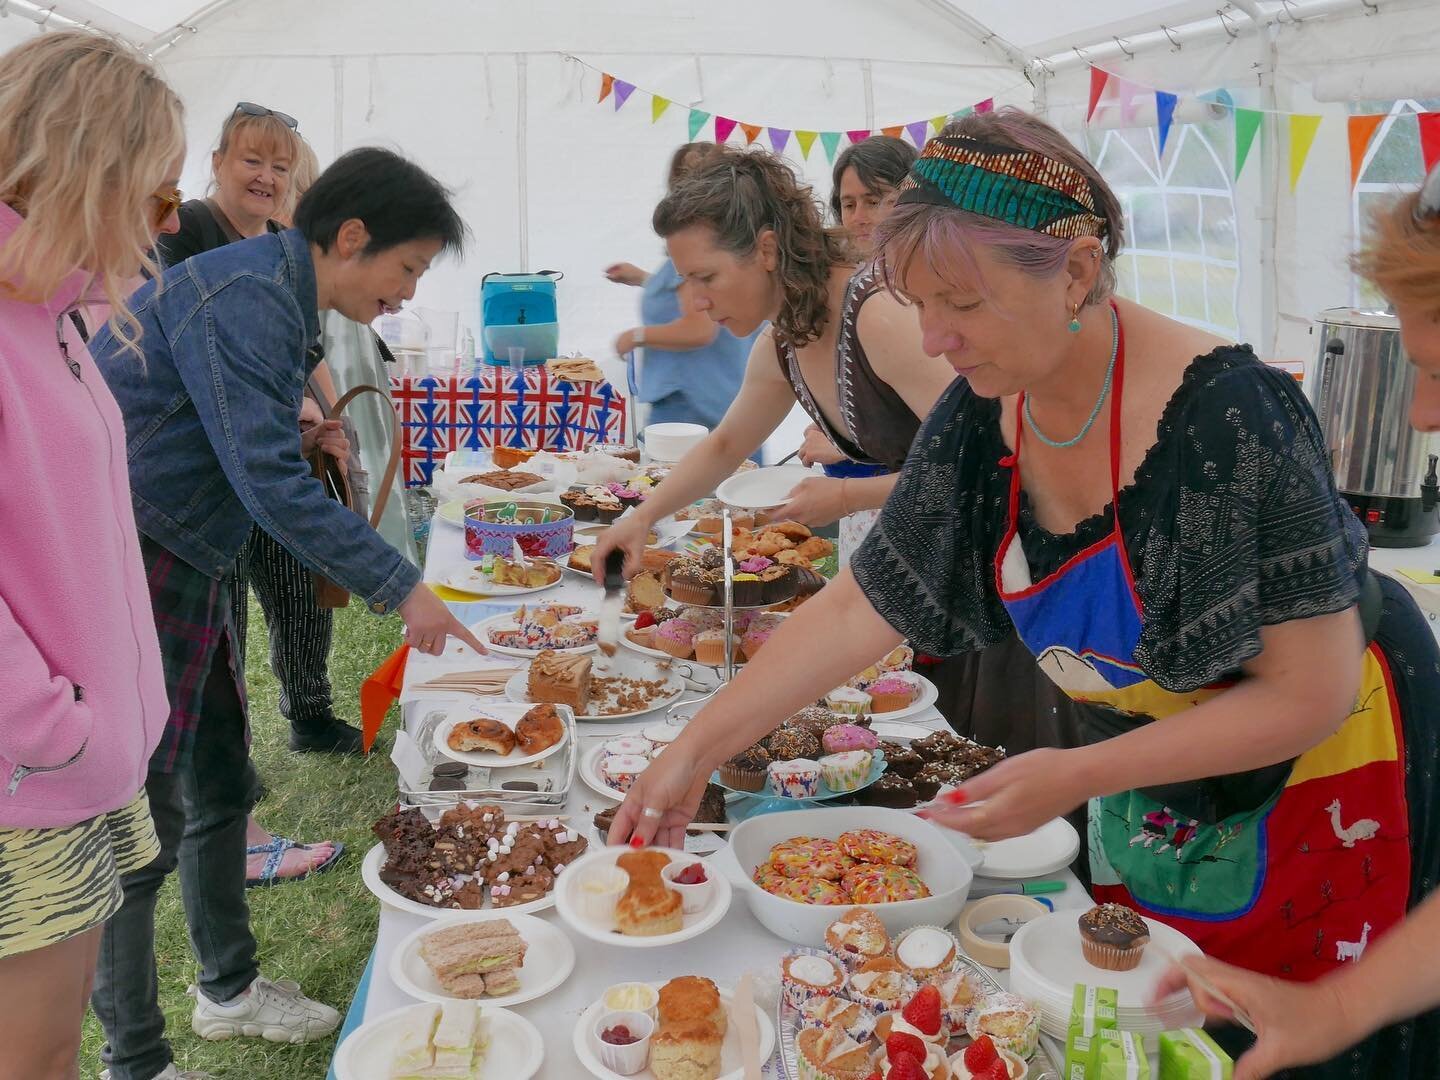 Last year&rsquo;s bake off was space theme 🪐🪐 comment your suggestions for this year!! Sunday 11th June 
#cake #hackney #london #victoriapark #wellstreetcommonfestival #wellstreetcommonfriends #wellstreetmarket #victoriaparkmarket #family #fun #day